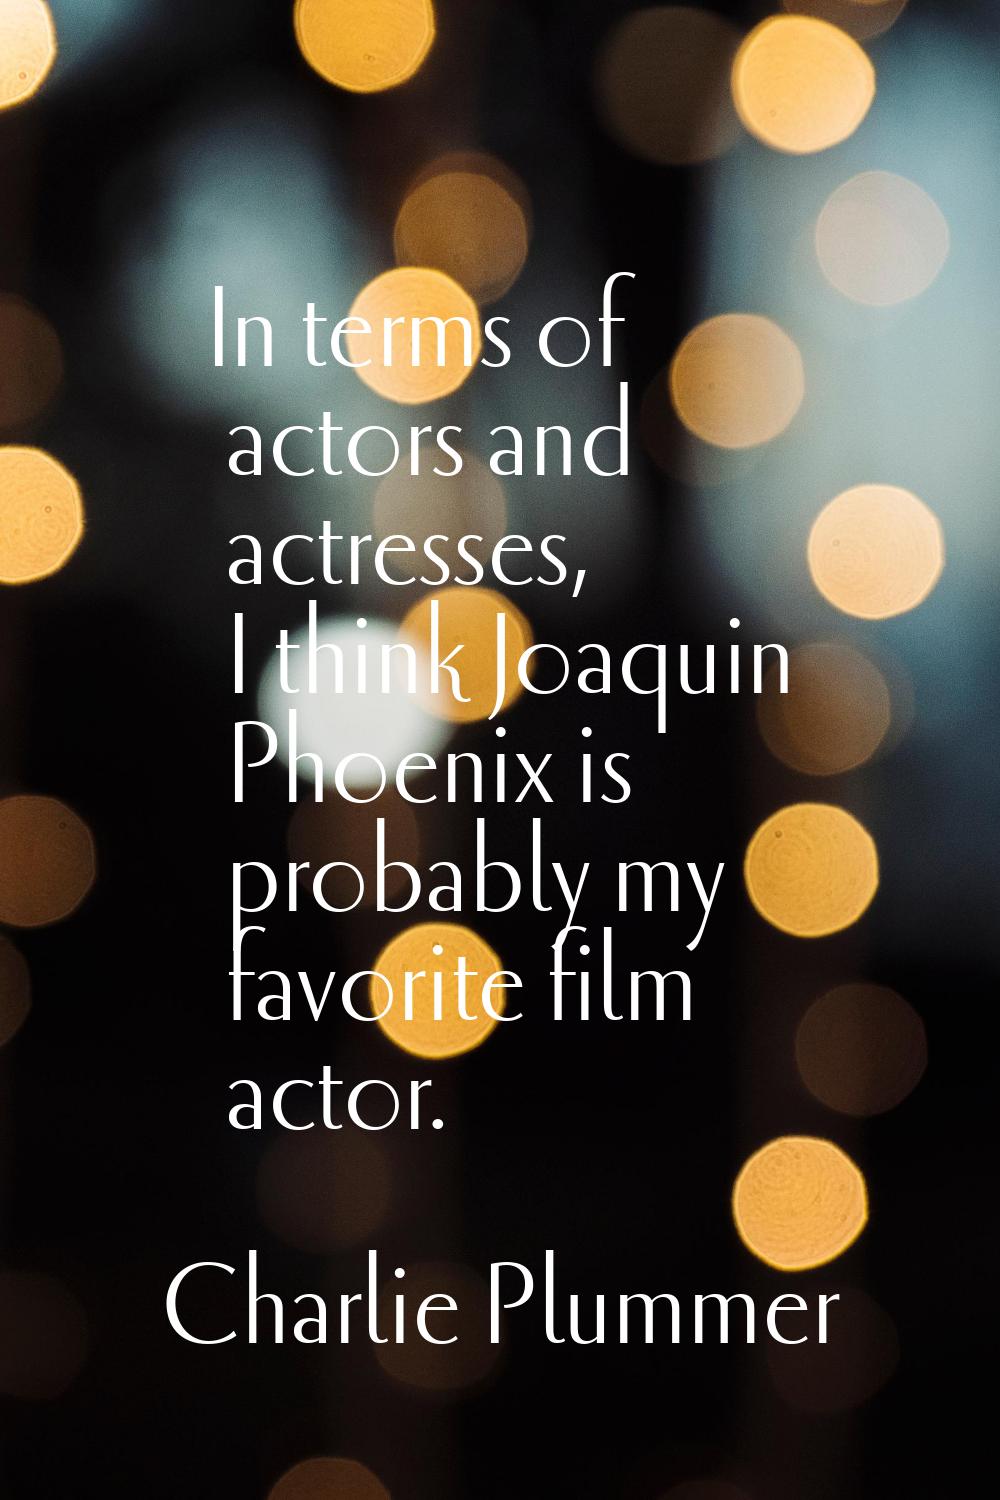 In terms of actors and actresses, I think Joaquin Phoenix is probably my favorite film actor.